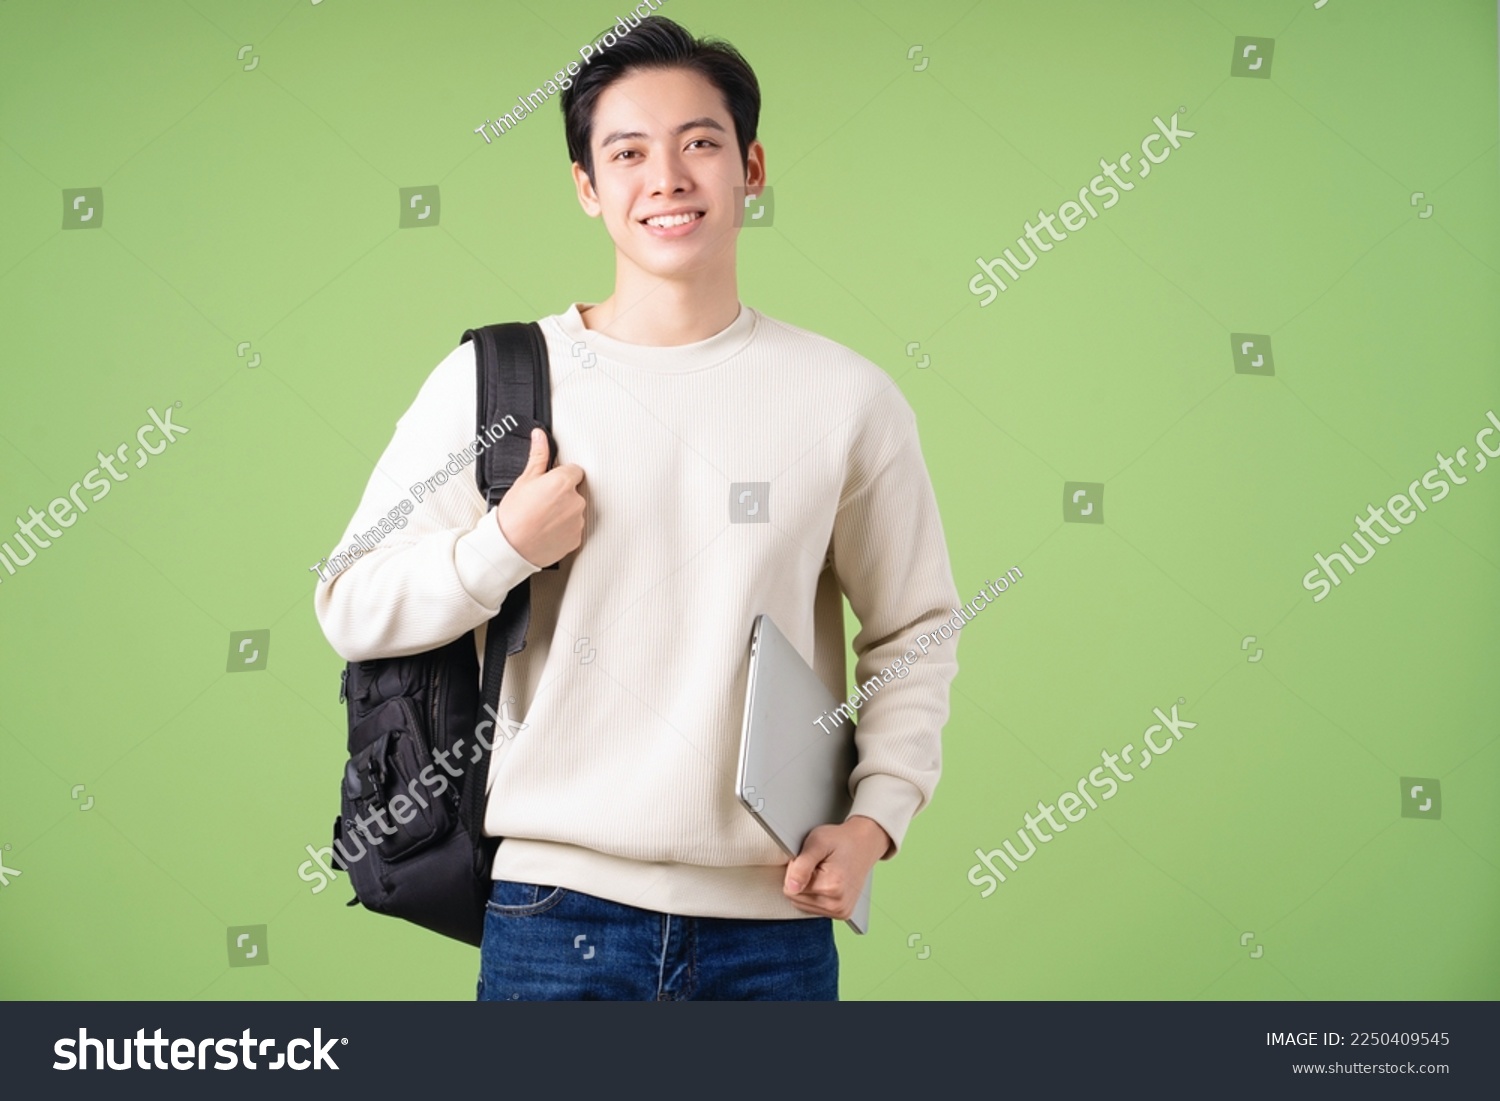 Image of young Asian student on background #2250409545